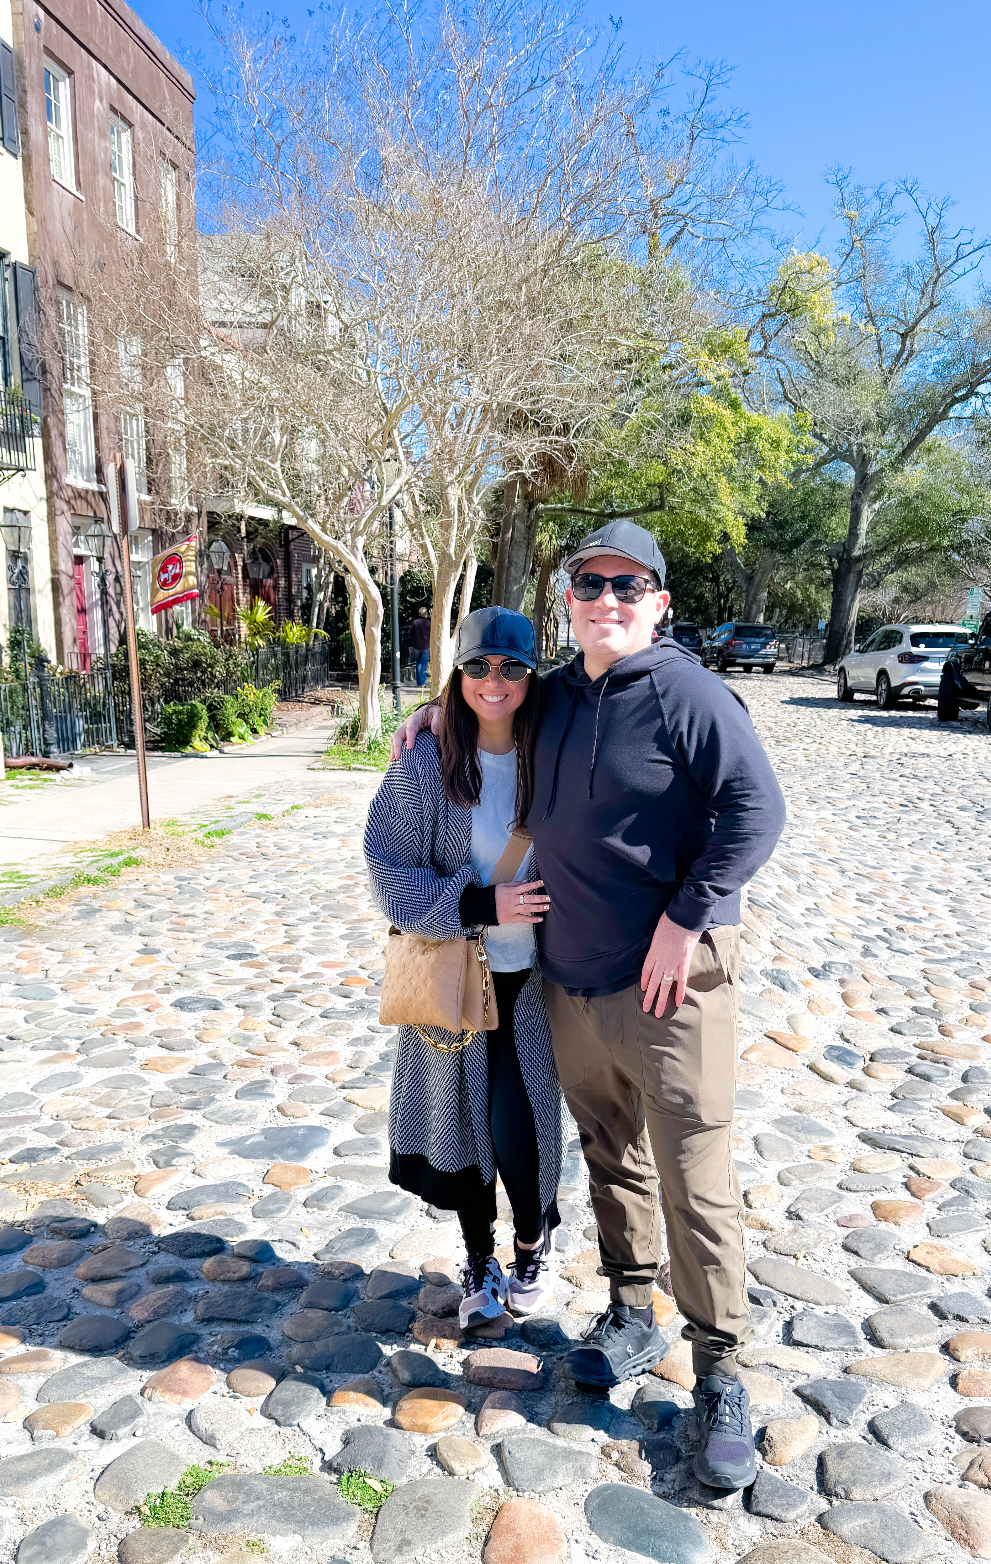 The cobblestone streets are oh so charming! 